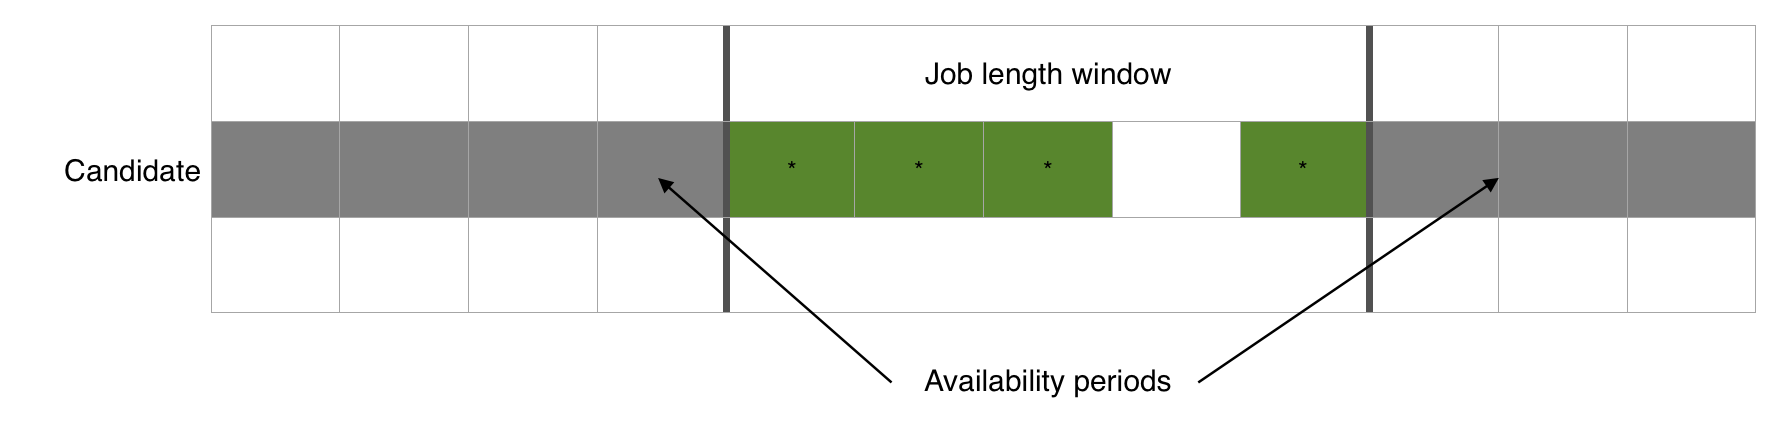 Candidate Availability Periods